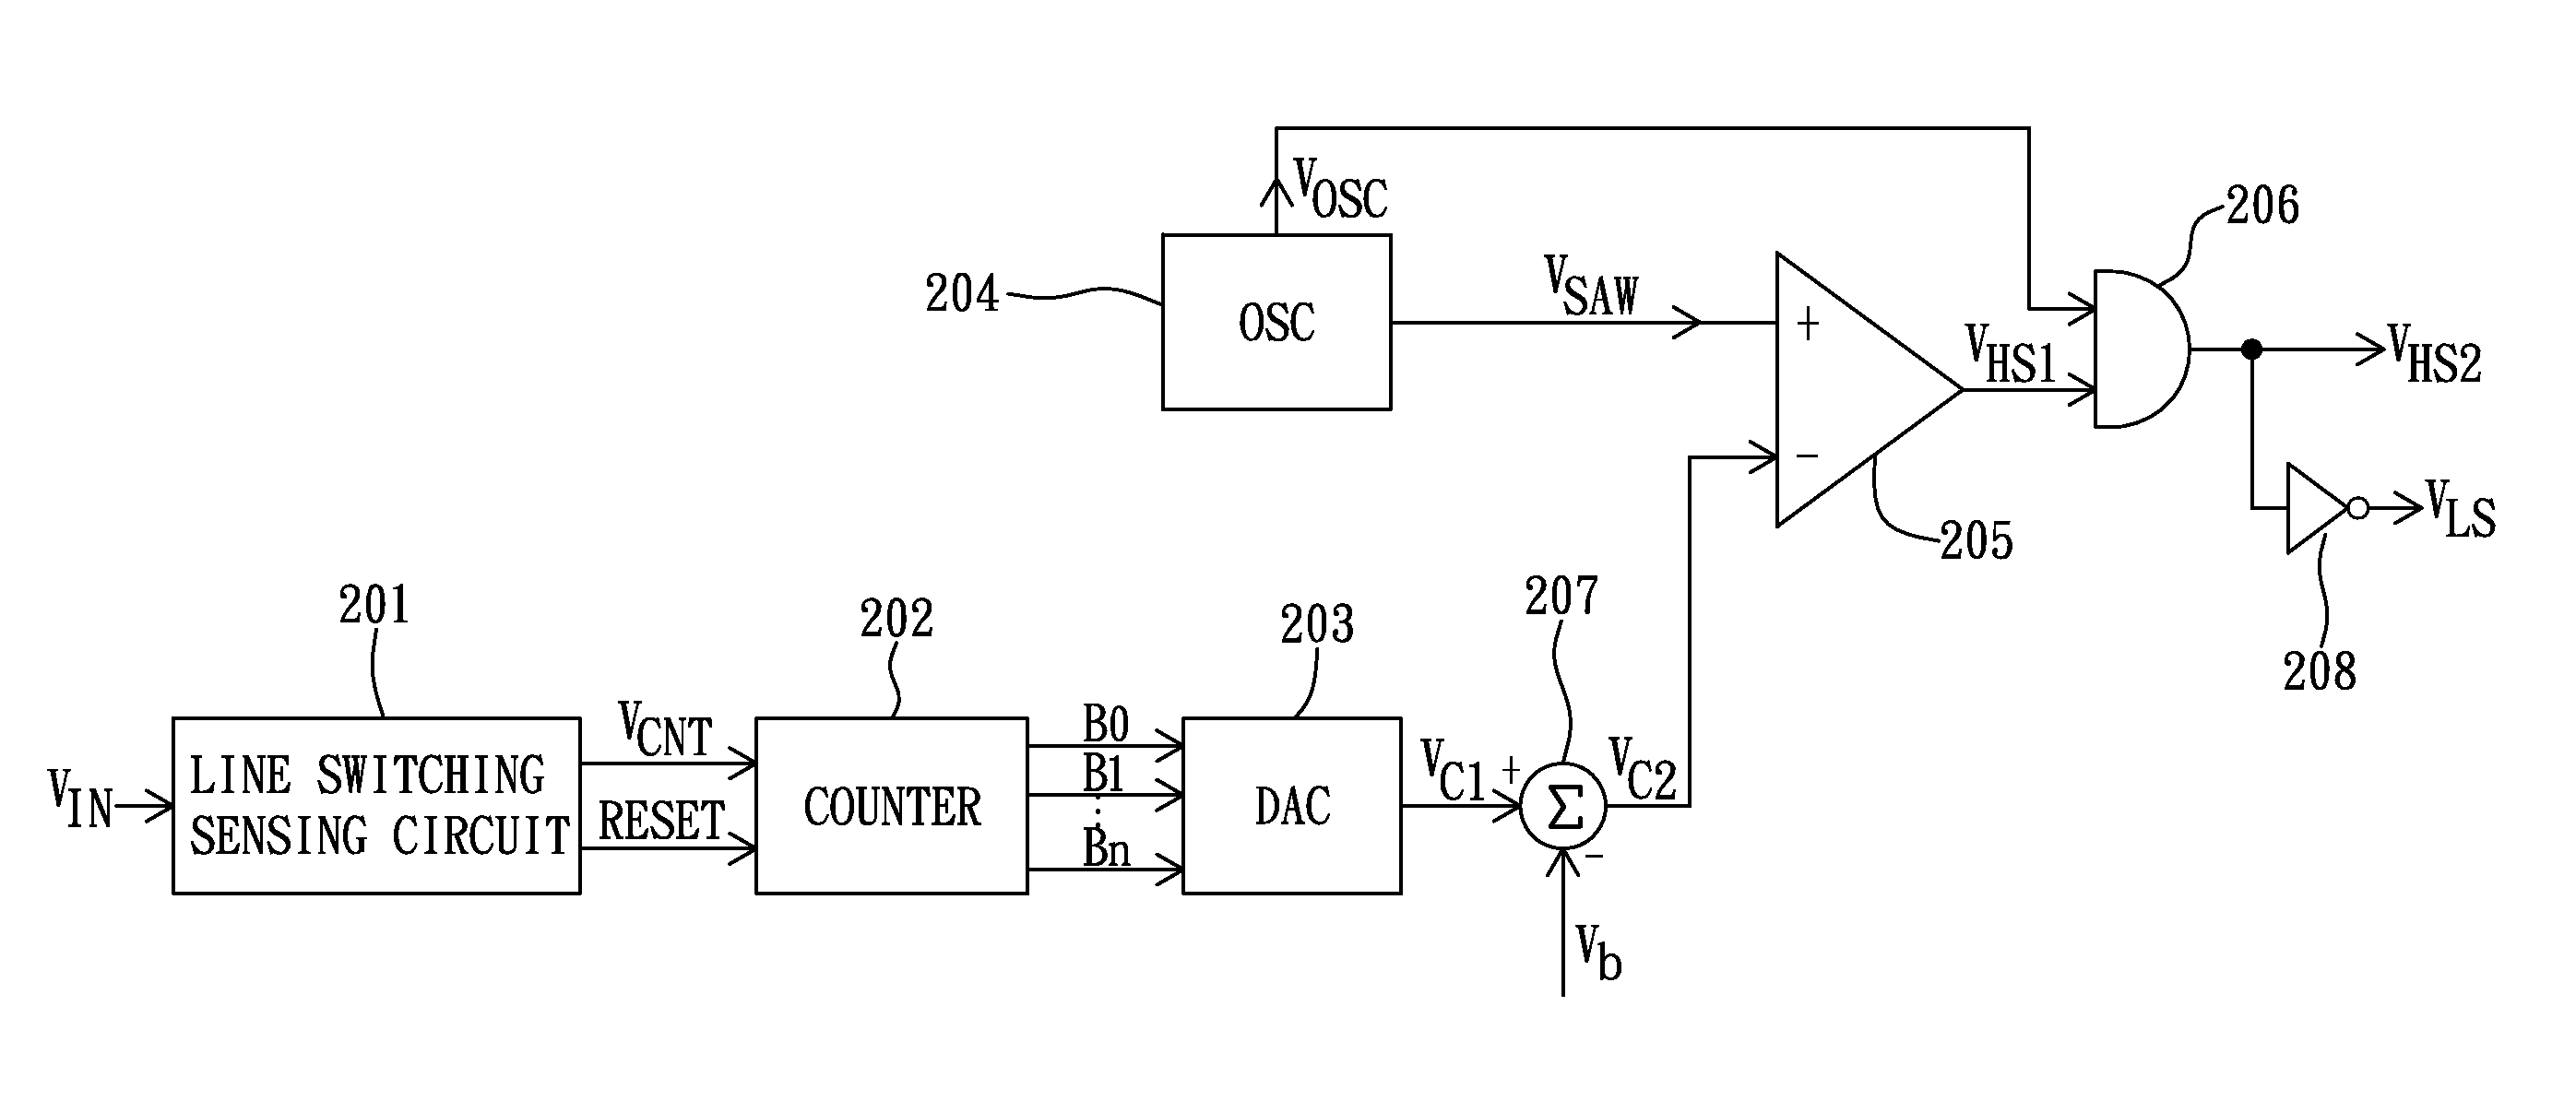 Electronic ballast with dimming control from power line sensing